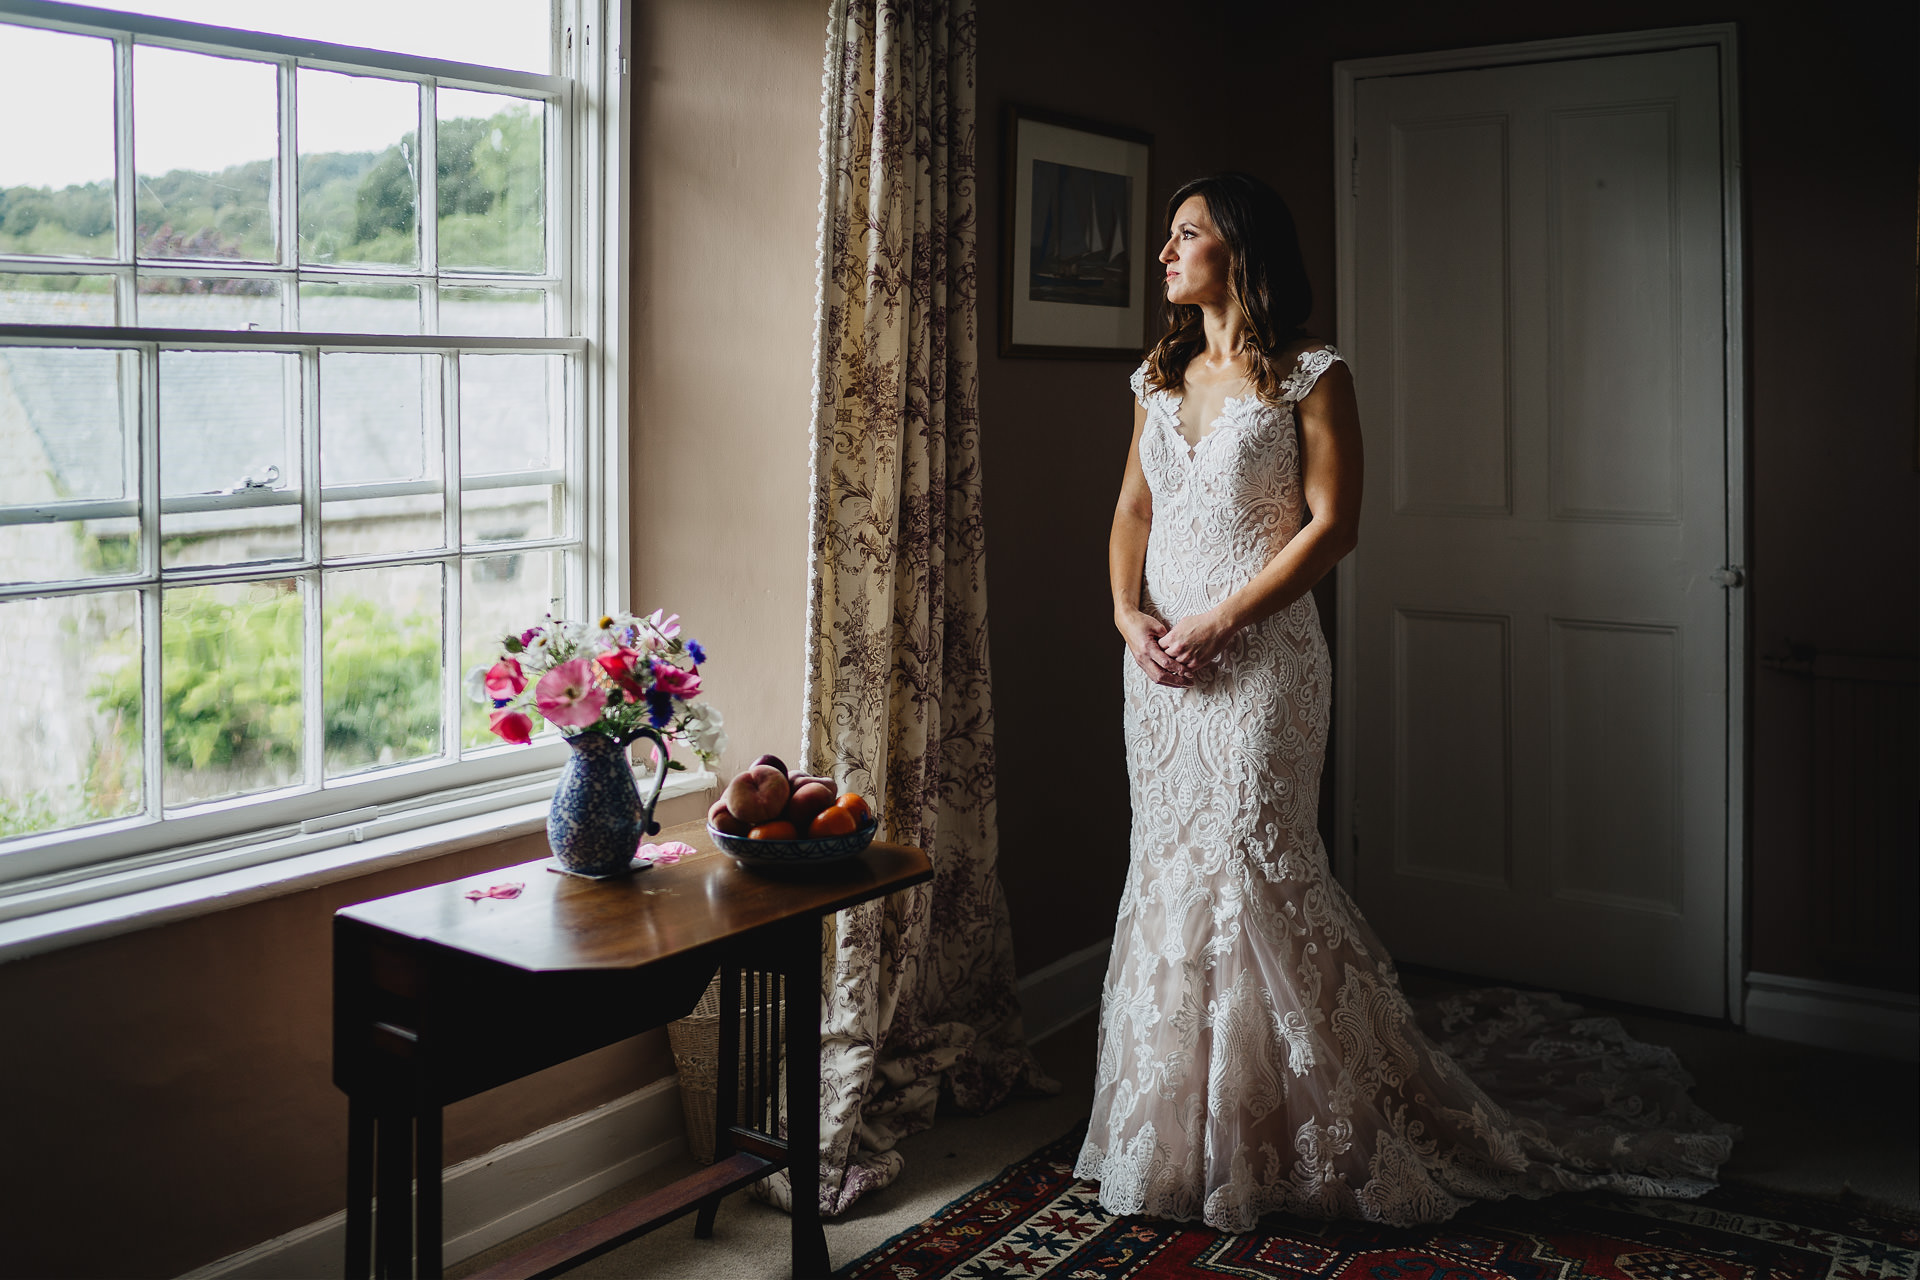 Portrait of a bride in a stunning white lace dress, standing by a window looking across Dartmoor views